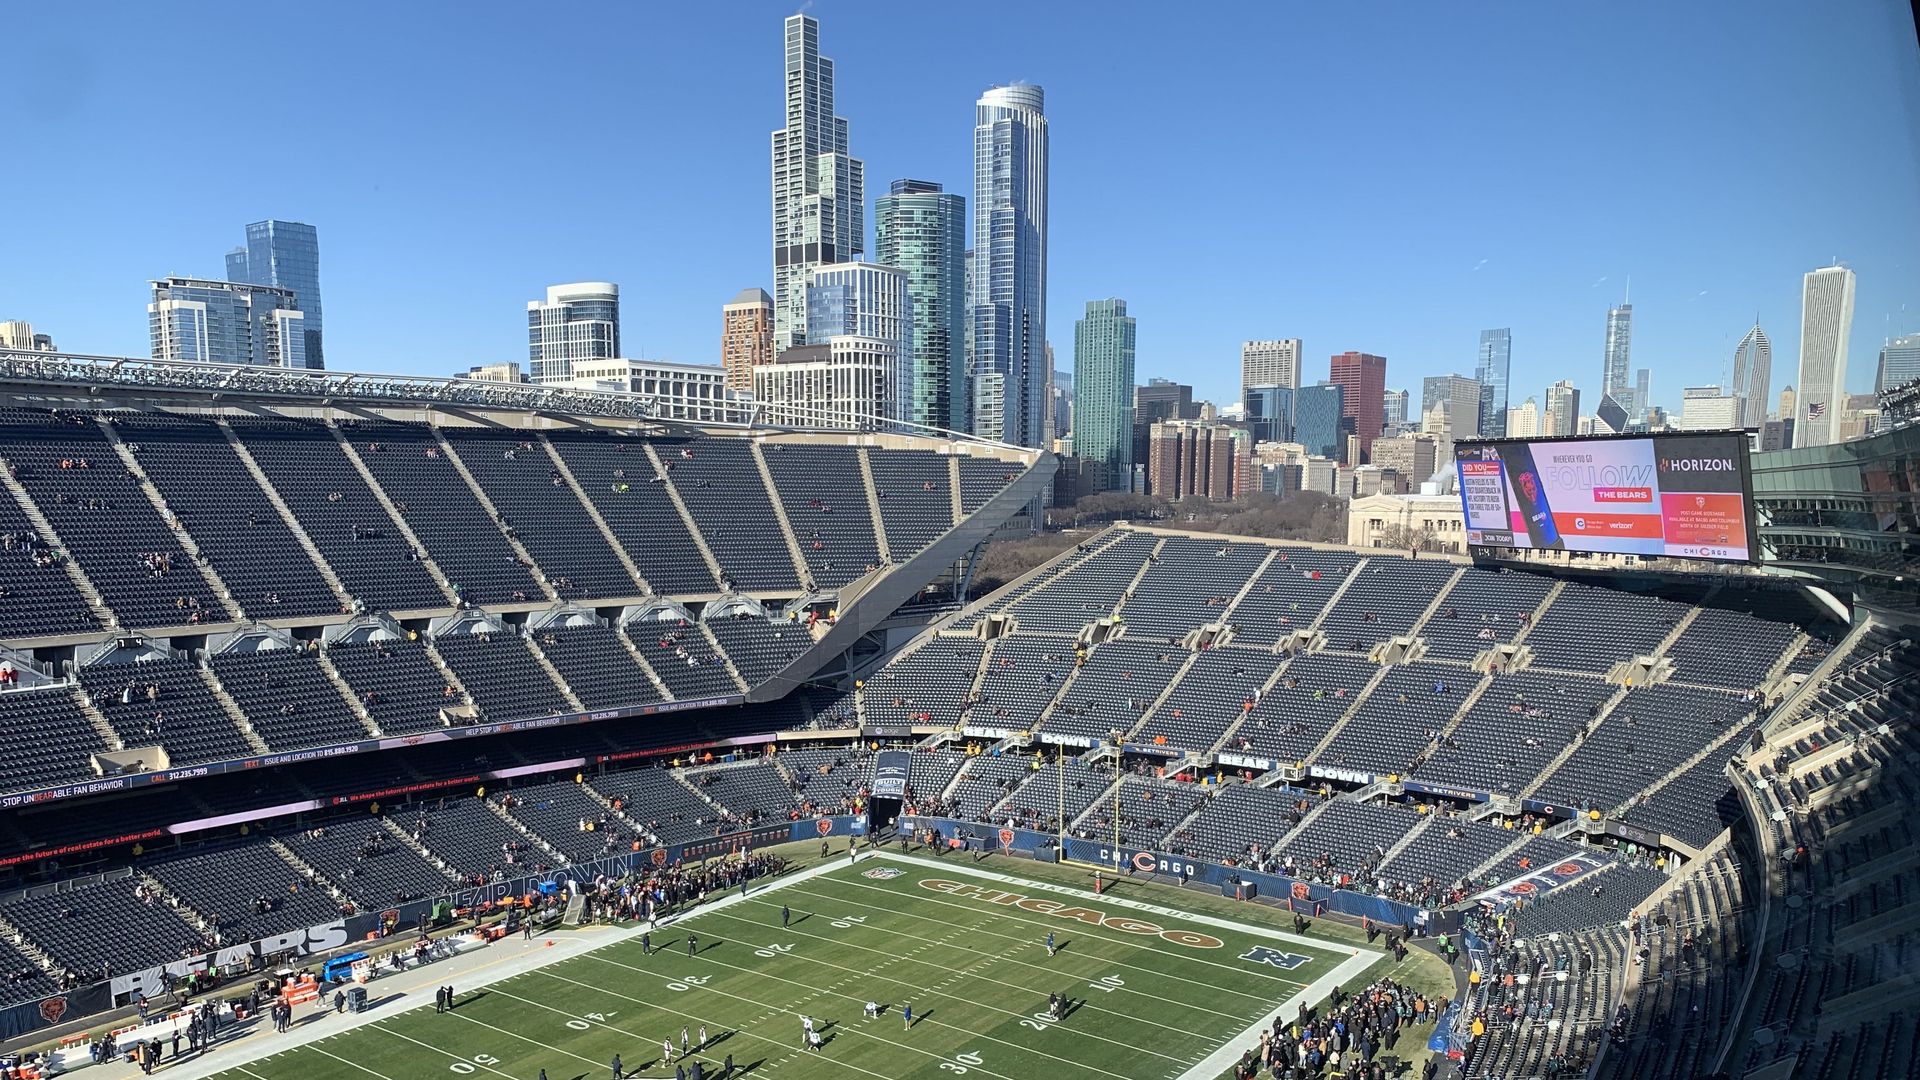 A view of the Chicago Bears stadium from a suite, with the skyline in the background.